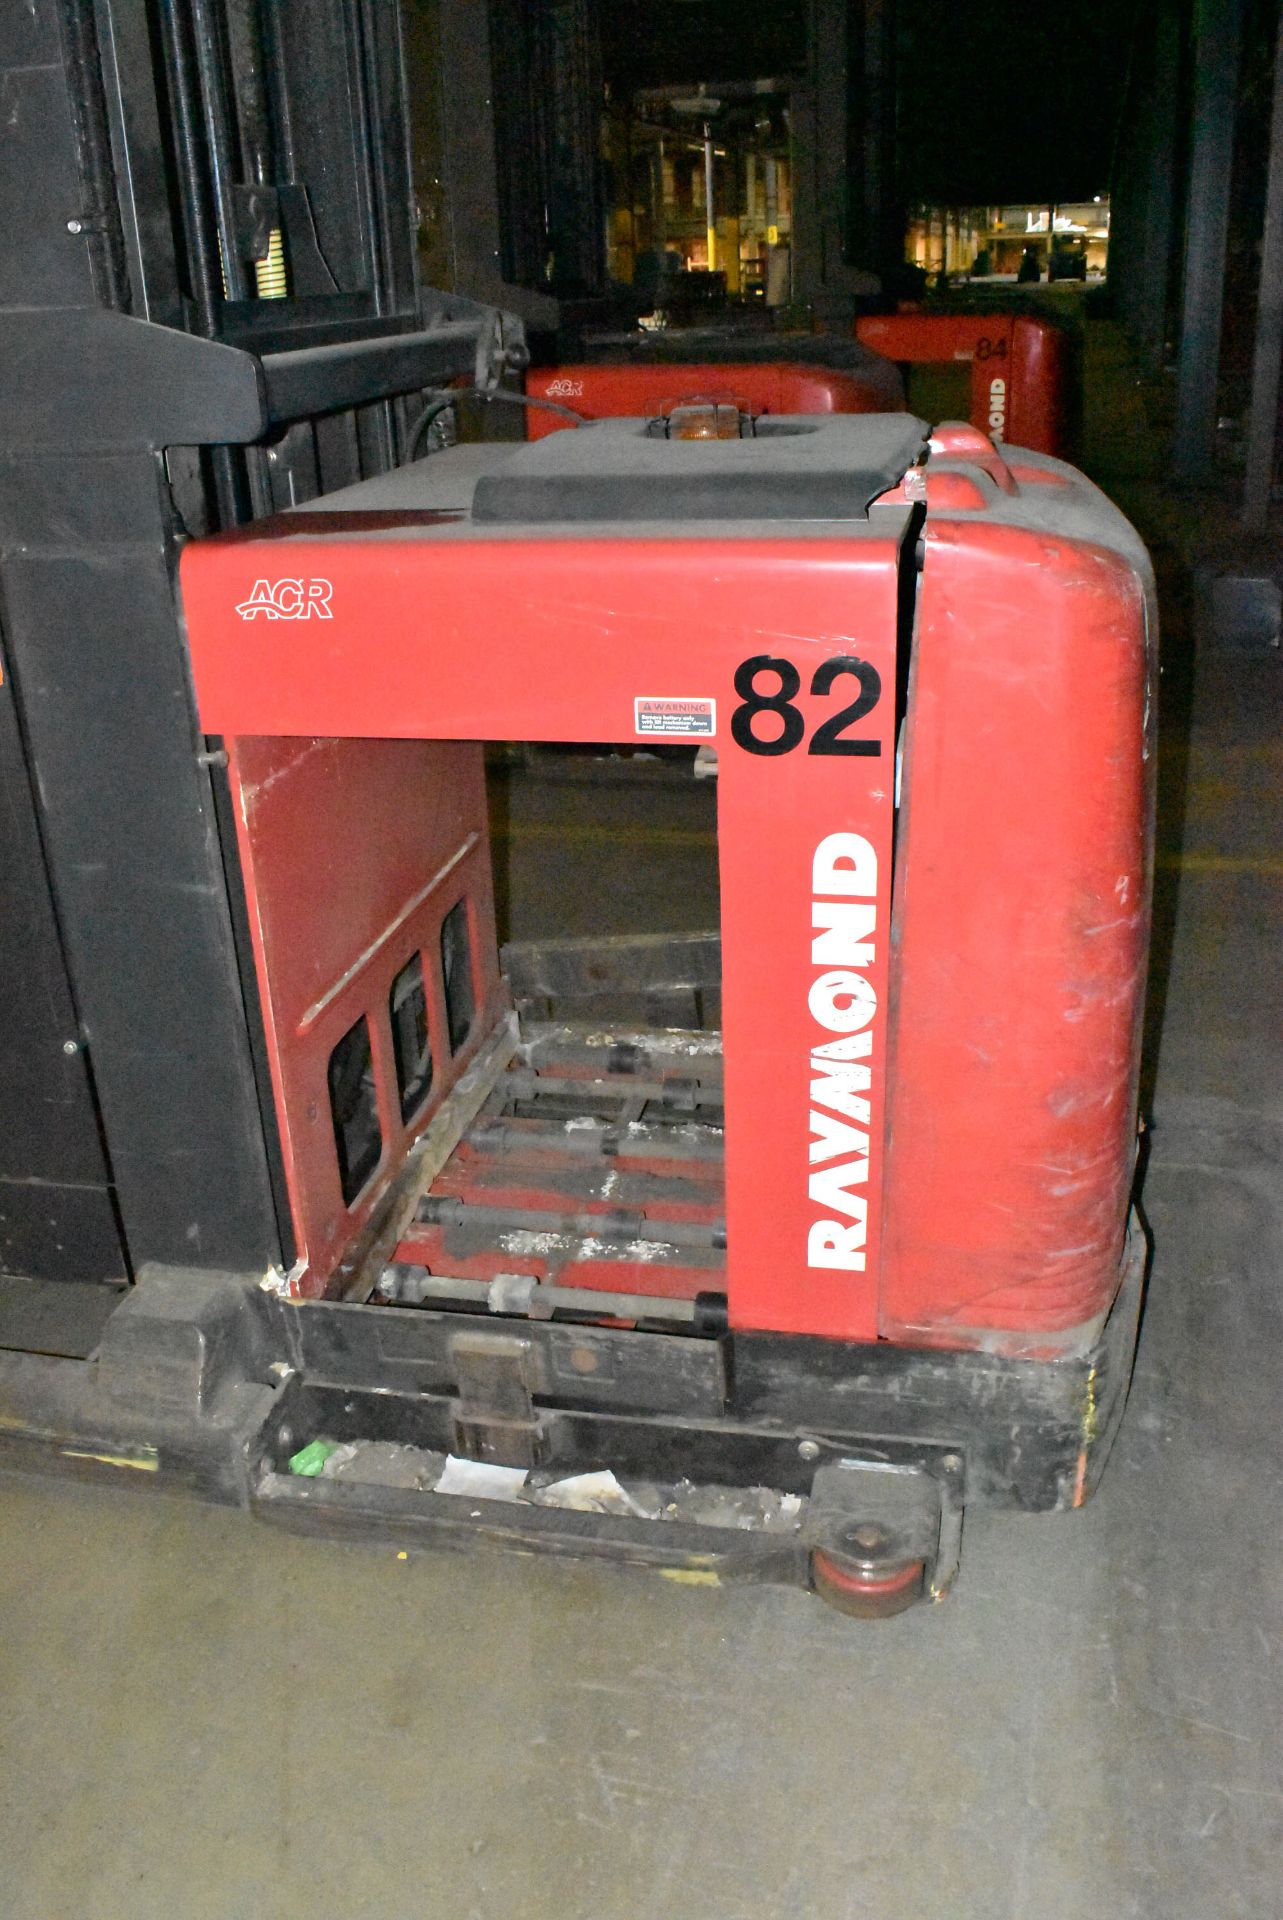 RAYMOND (2015) 560-OPC30TT 1,700 LB. CAPACITY 36V ELECTRIC ORDER PICKER WITH 330" MAX. LIFT - Image 4 of 9